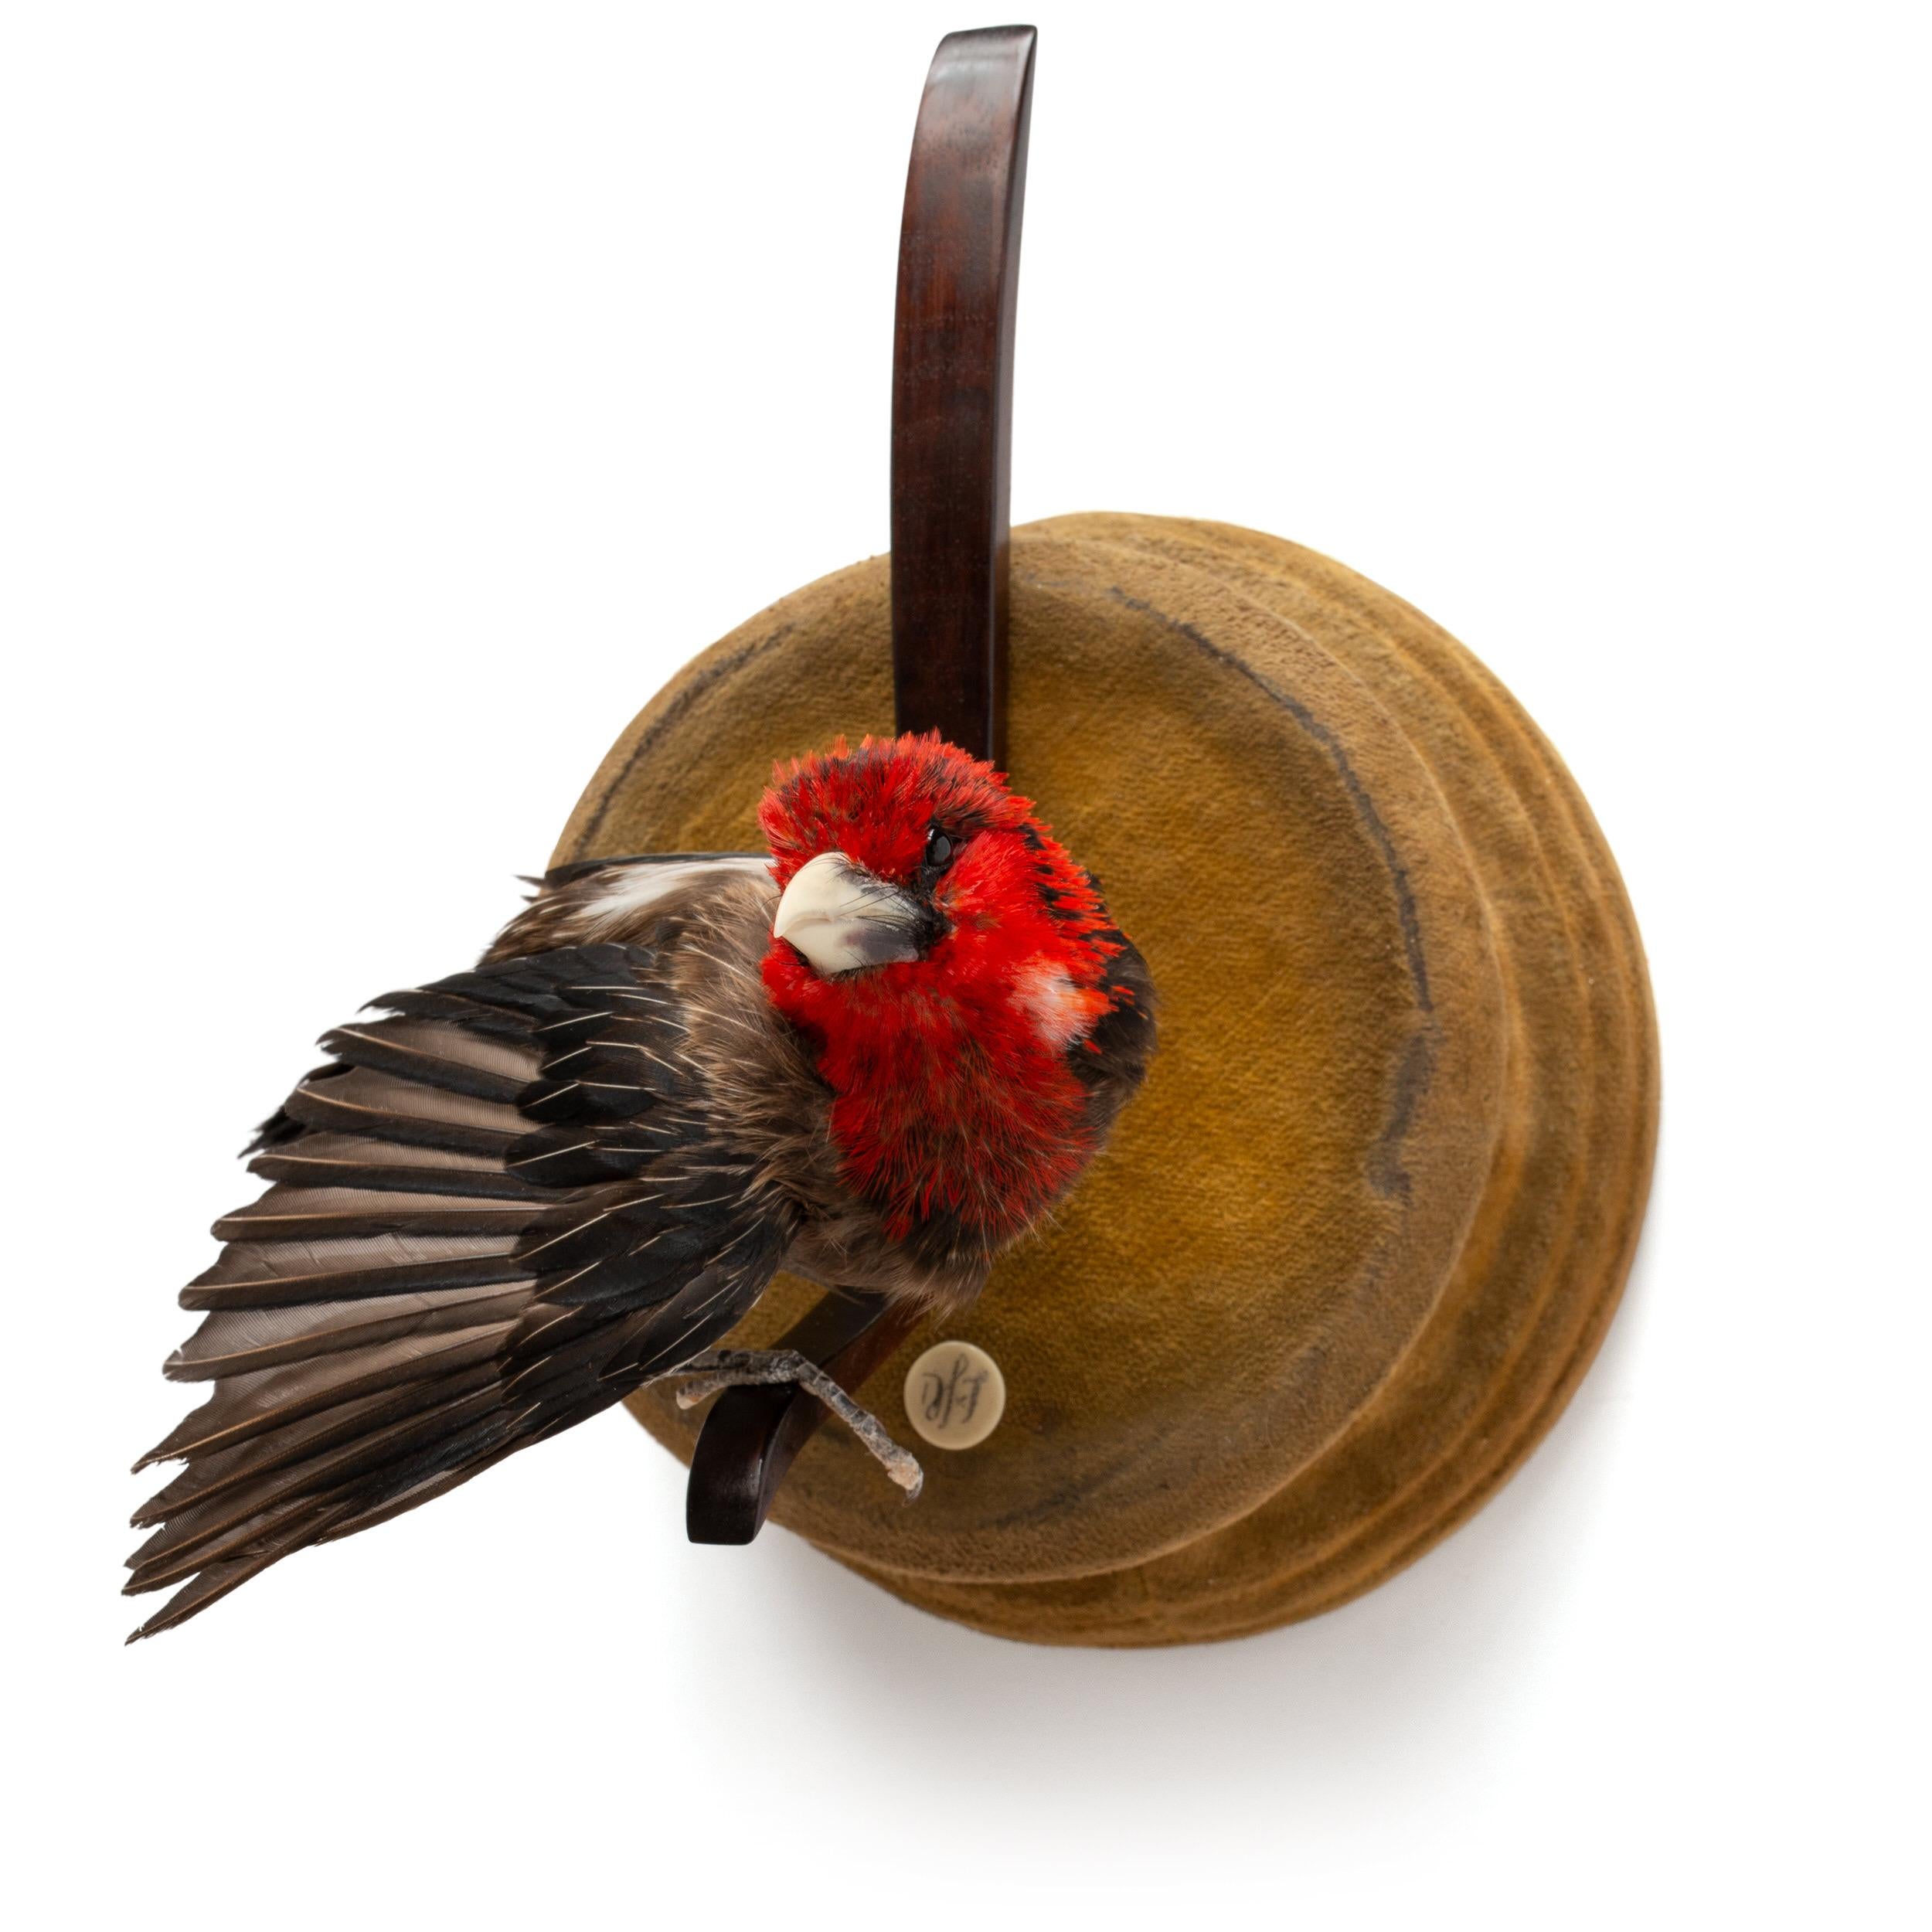 ‘Stills from a Courtship Dance’ is a series of fine taxidermy works with smaller exotic (rare) birds. Sinke and van Tongeren created this series of birds as if they suddenly seemed frozen during the lascivious work put into their mating dance.